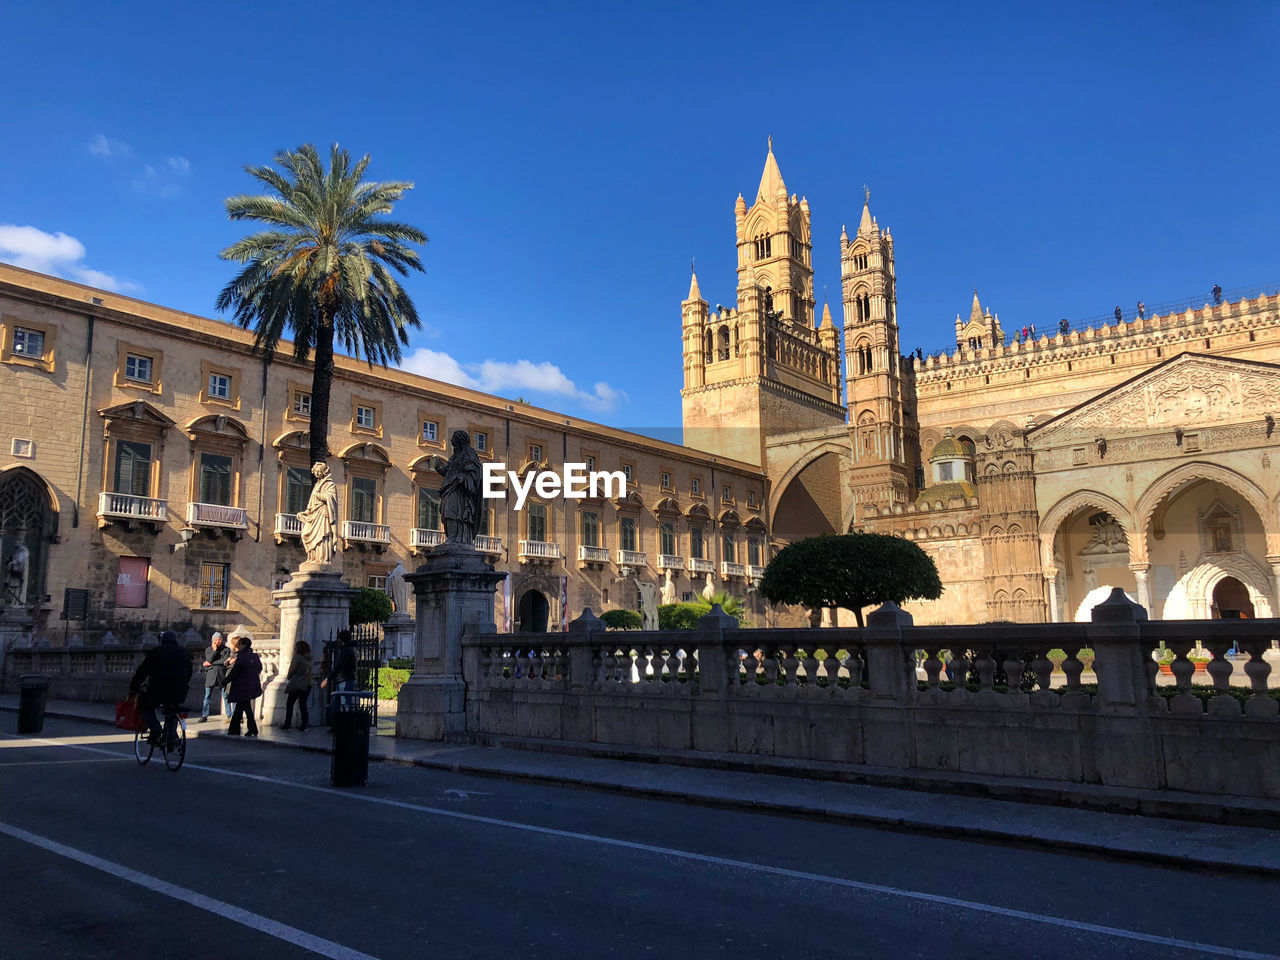 The famous cathedral of palermo